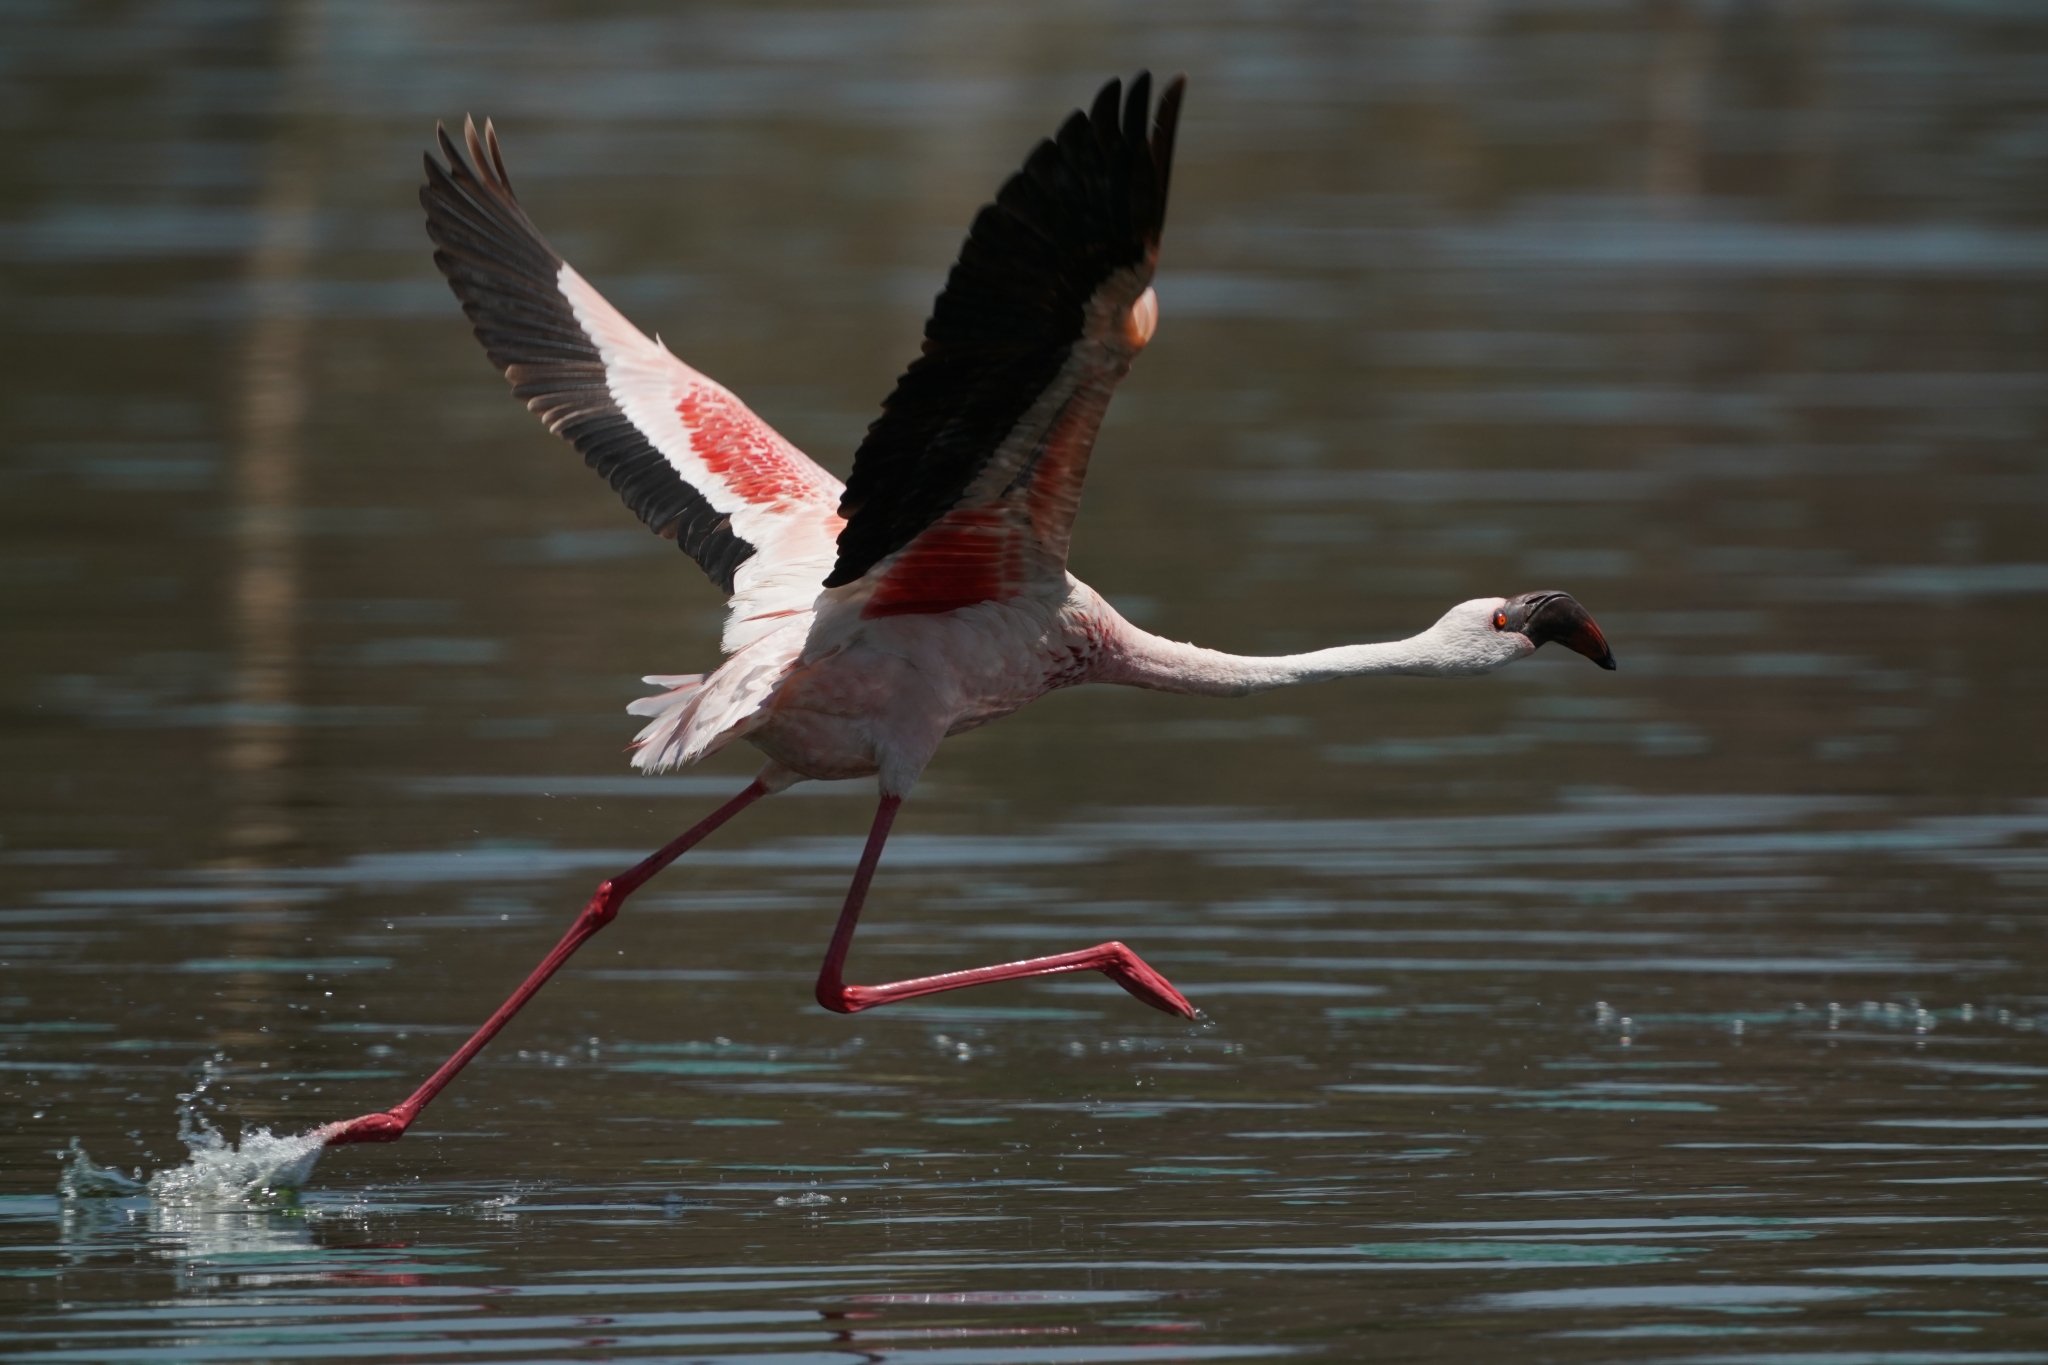 Crane taking flight from shallow water